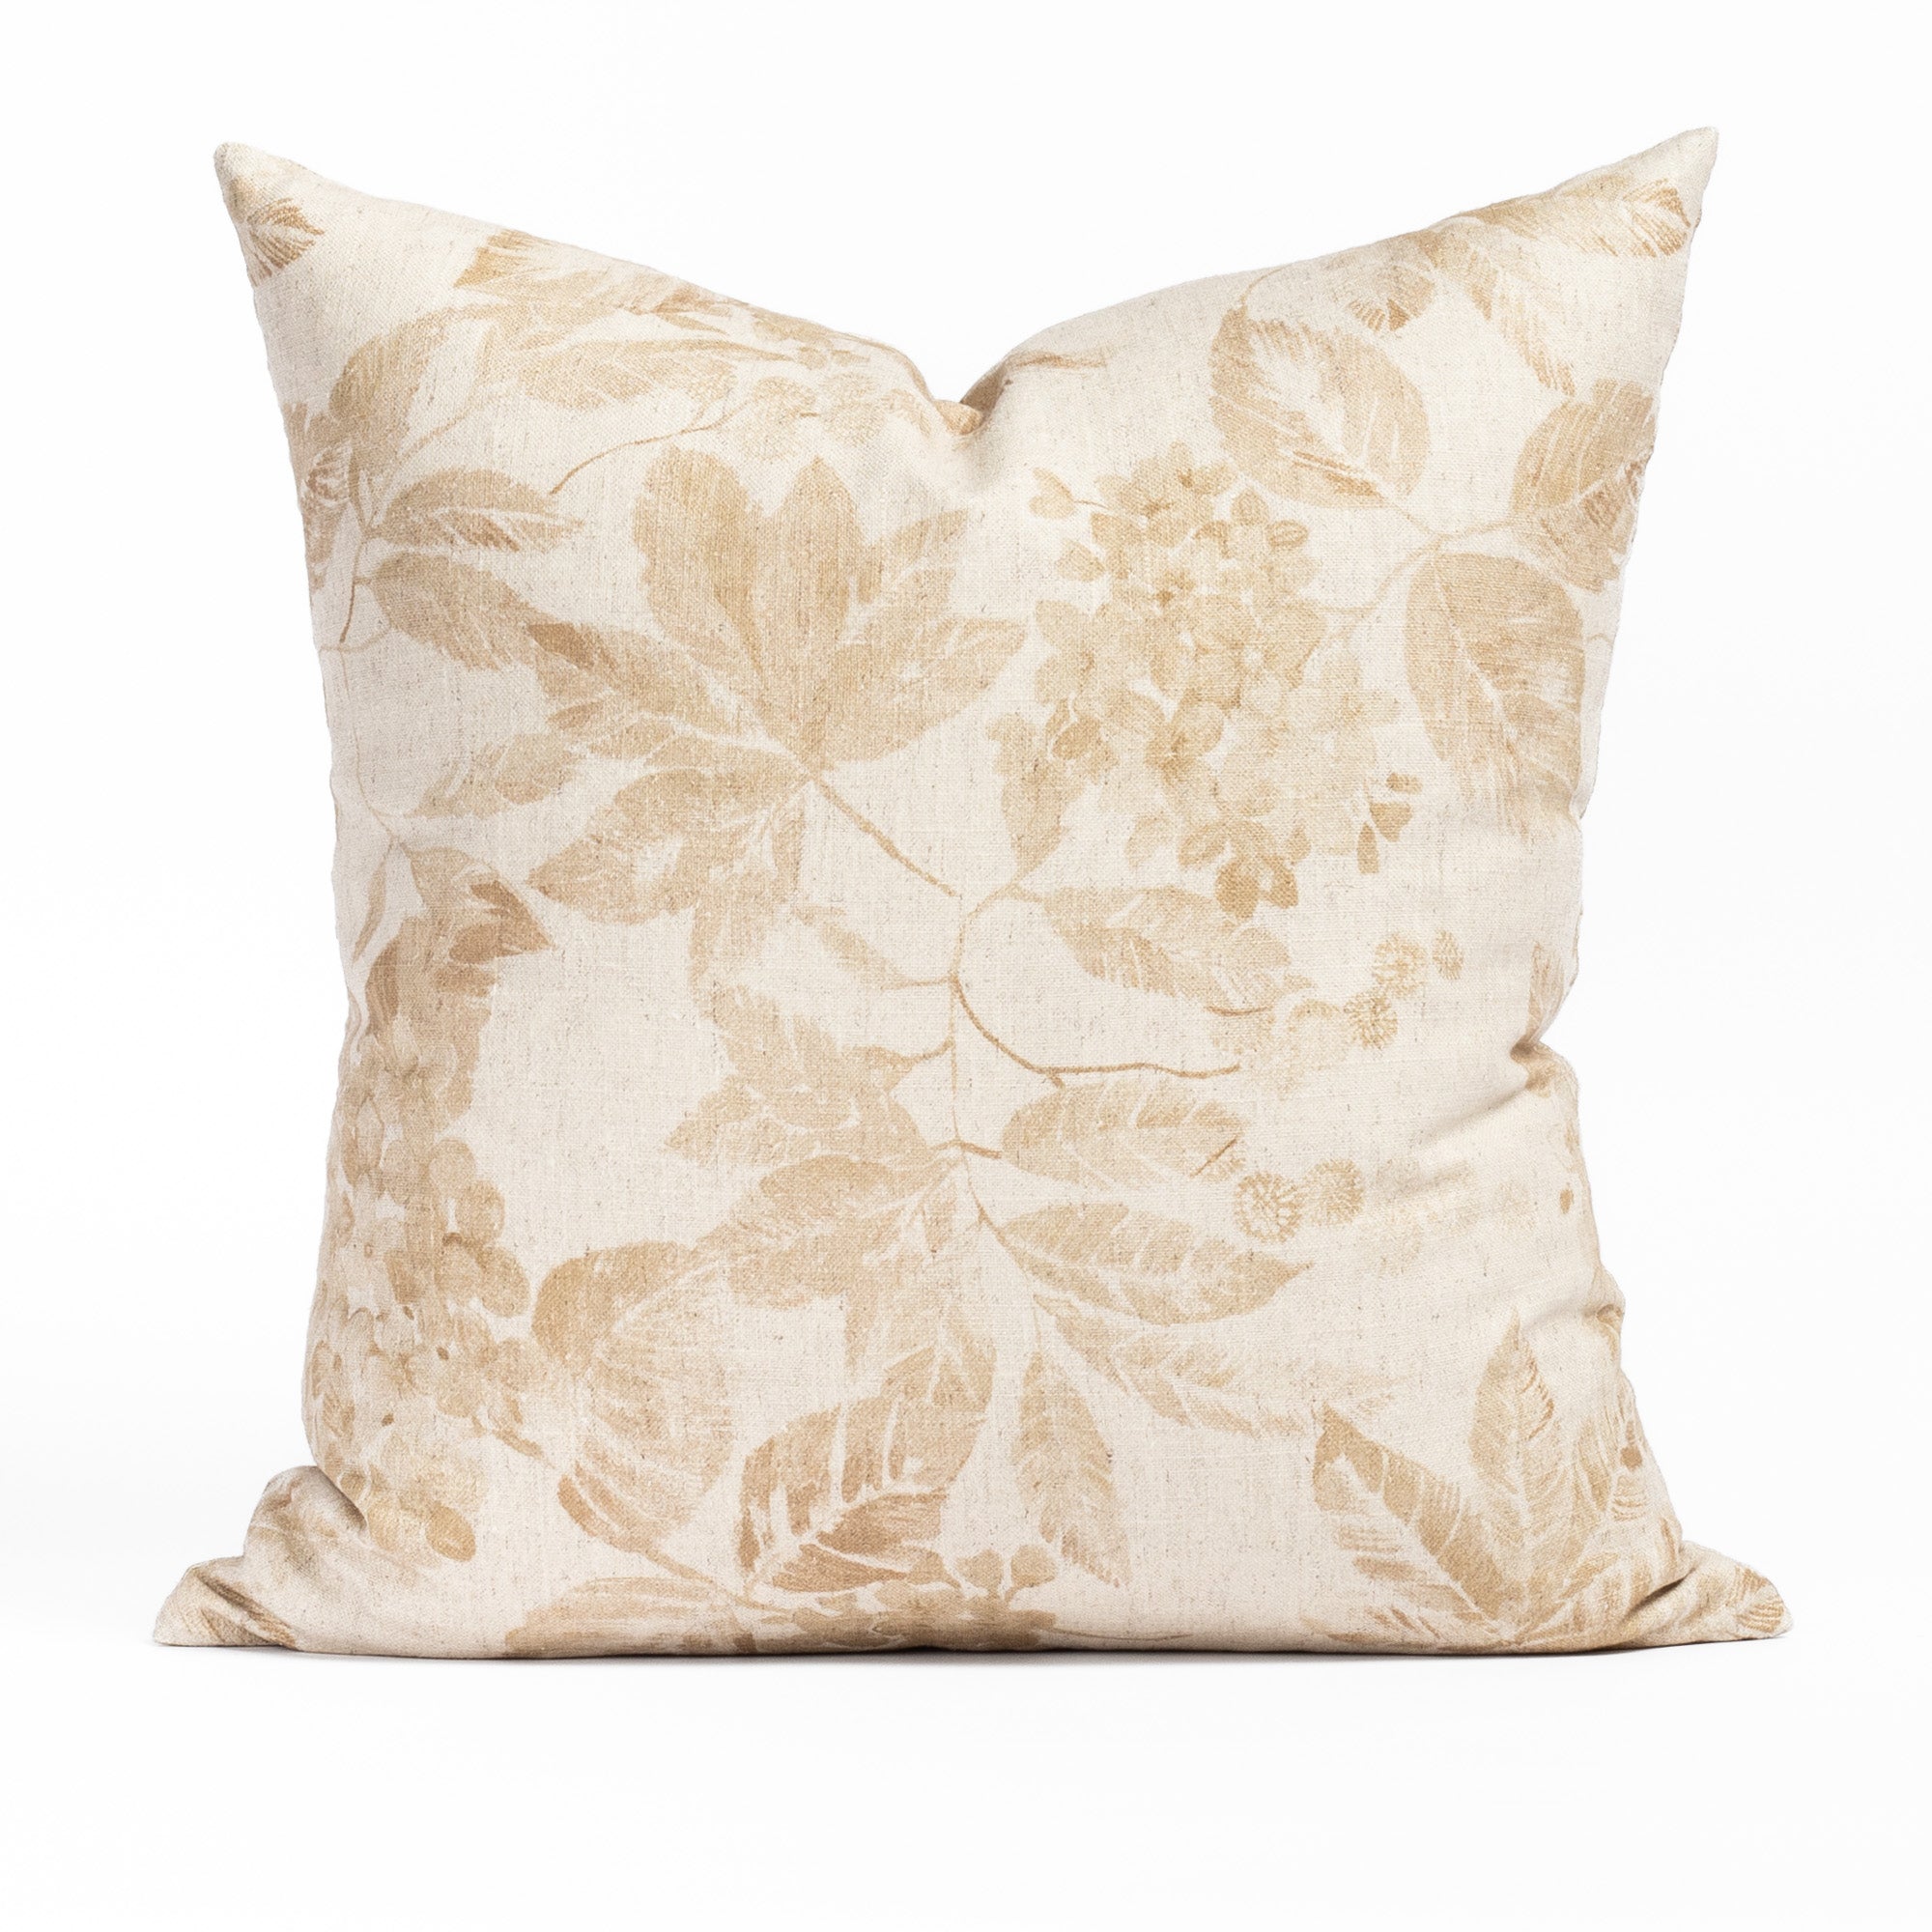 Heather 20x20 Pillow Ochre, an ochre brown and oatmeal vintage floral print pillow from Tonic Living